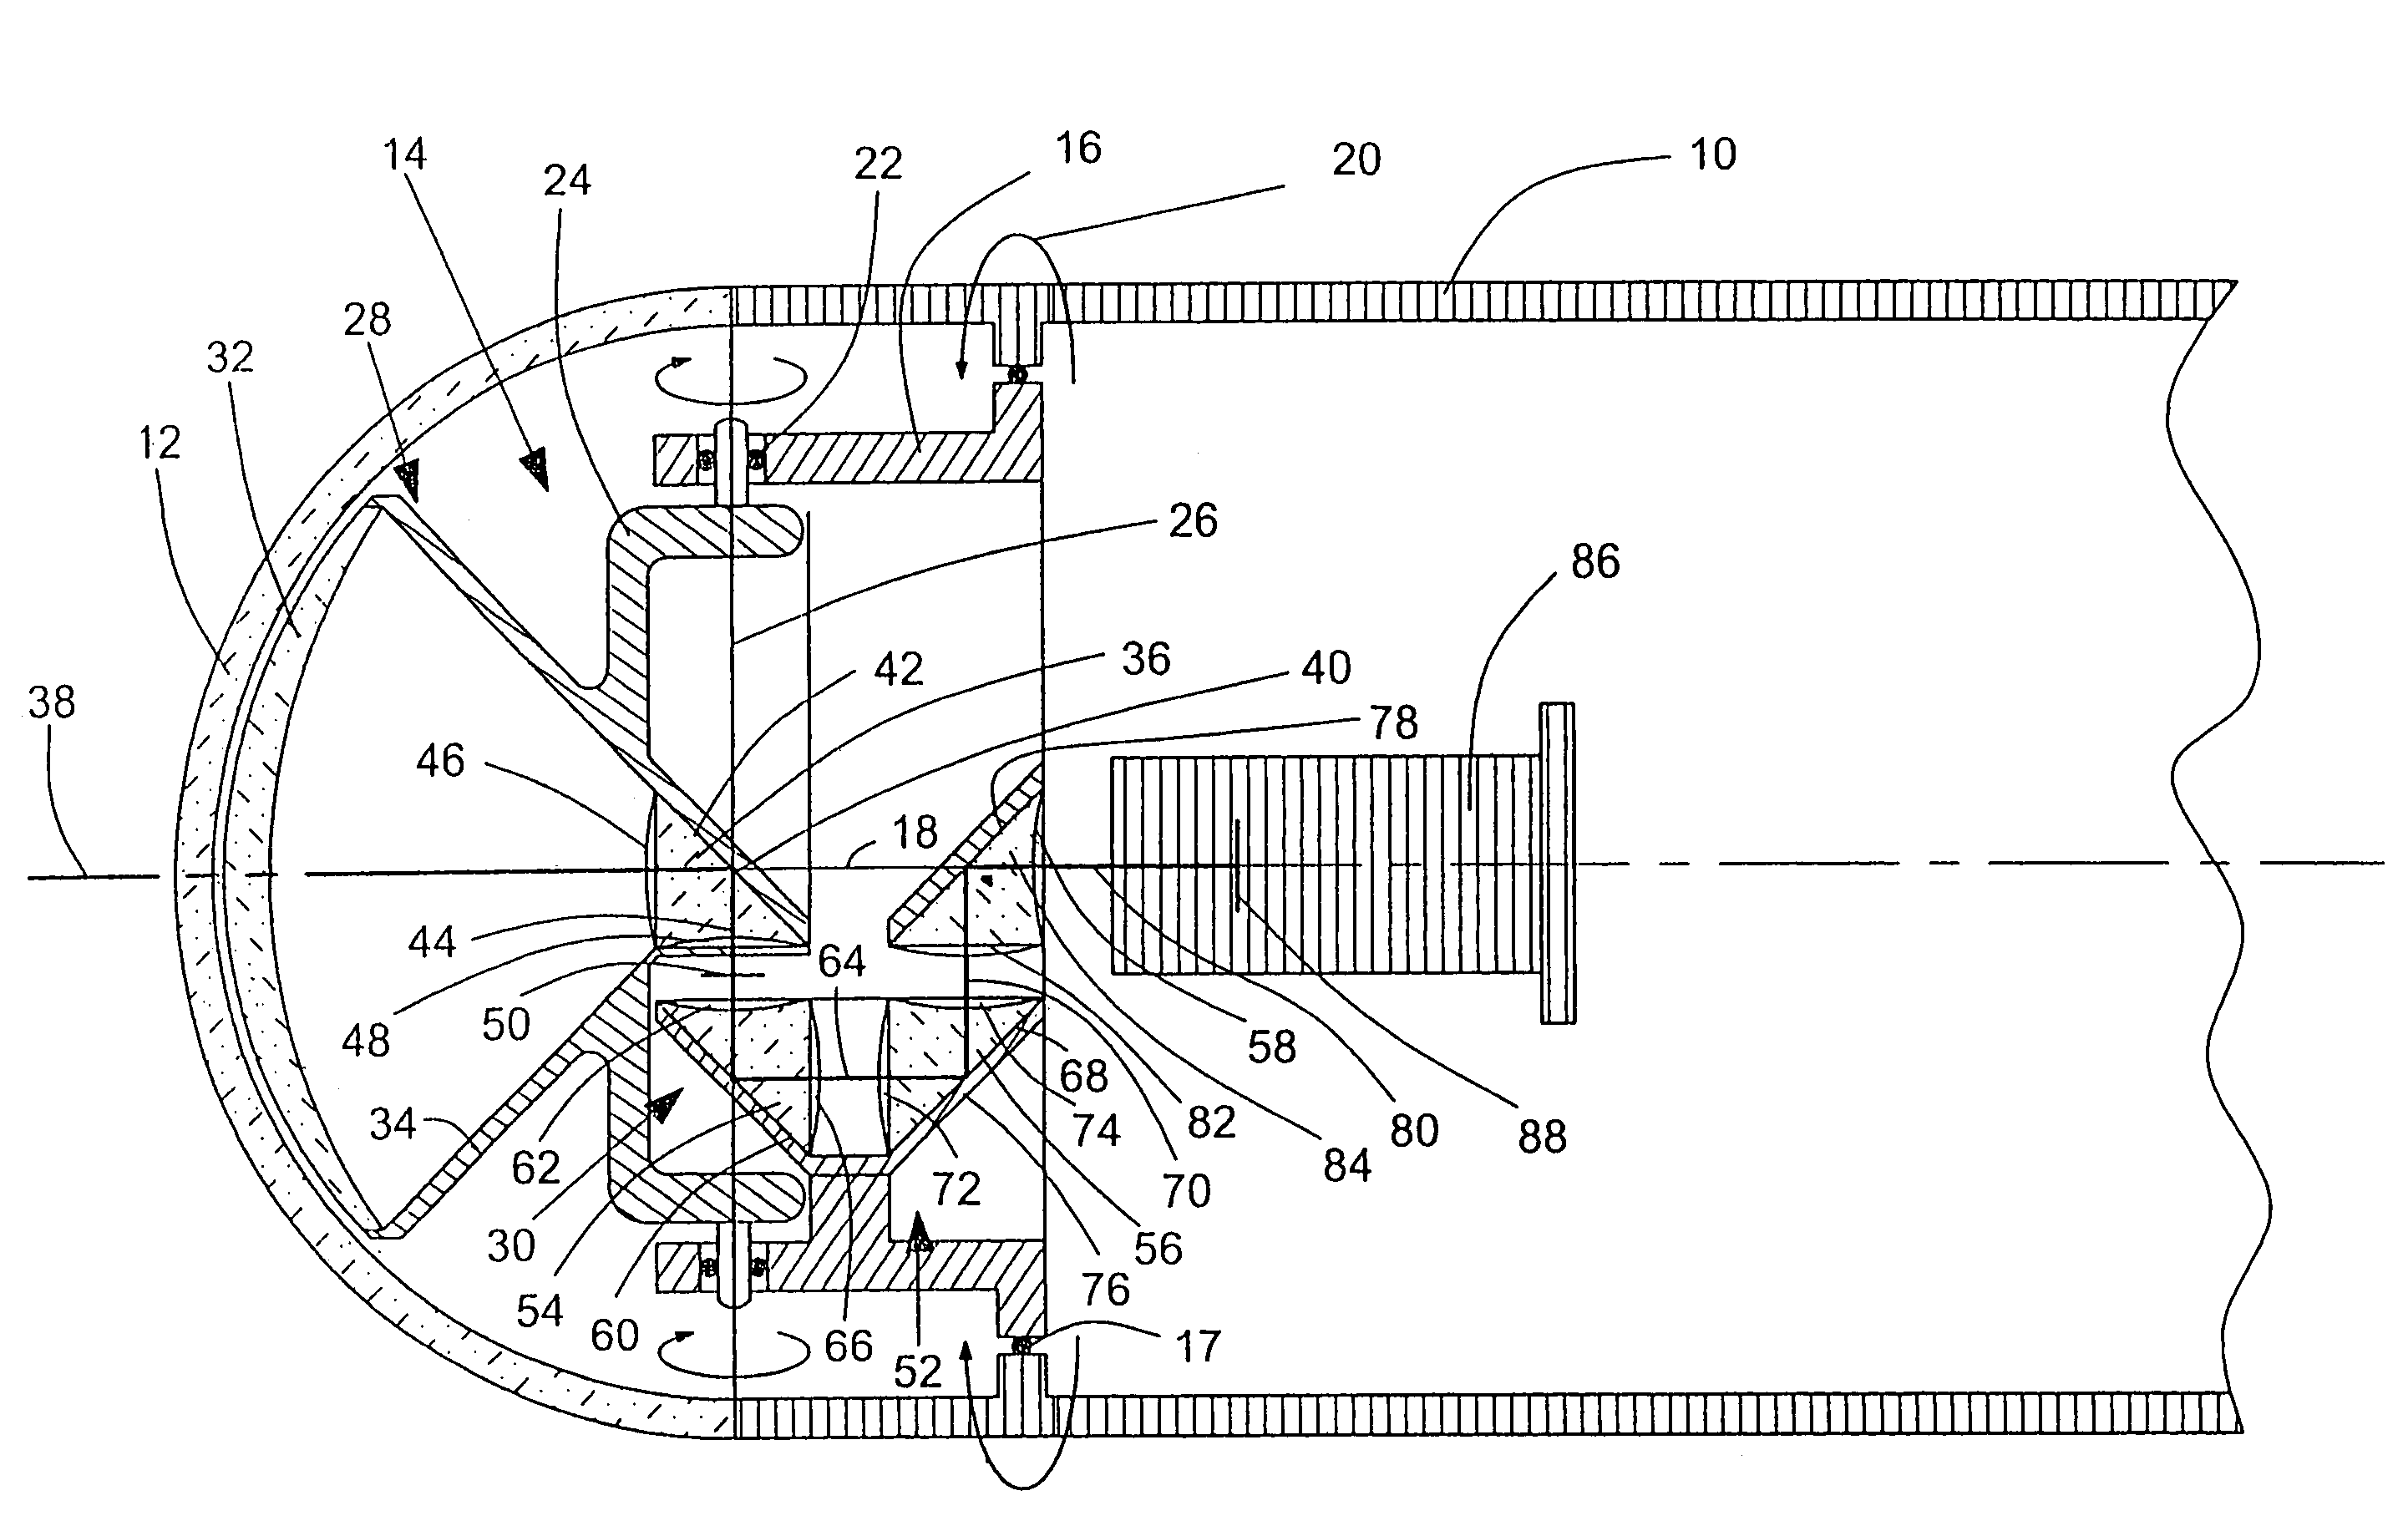 Apparatus for capturing on object scene